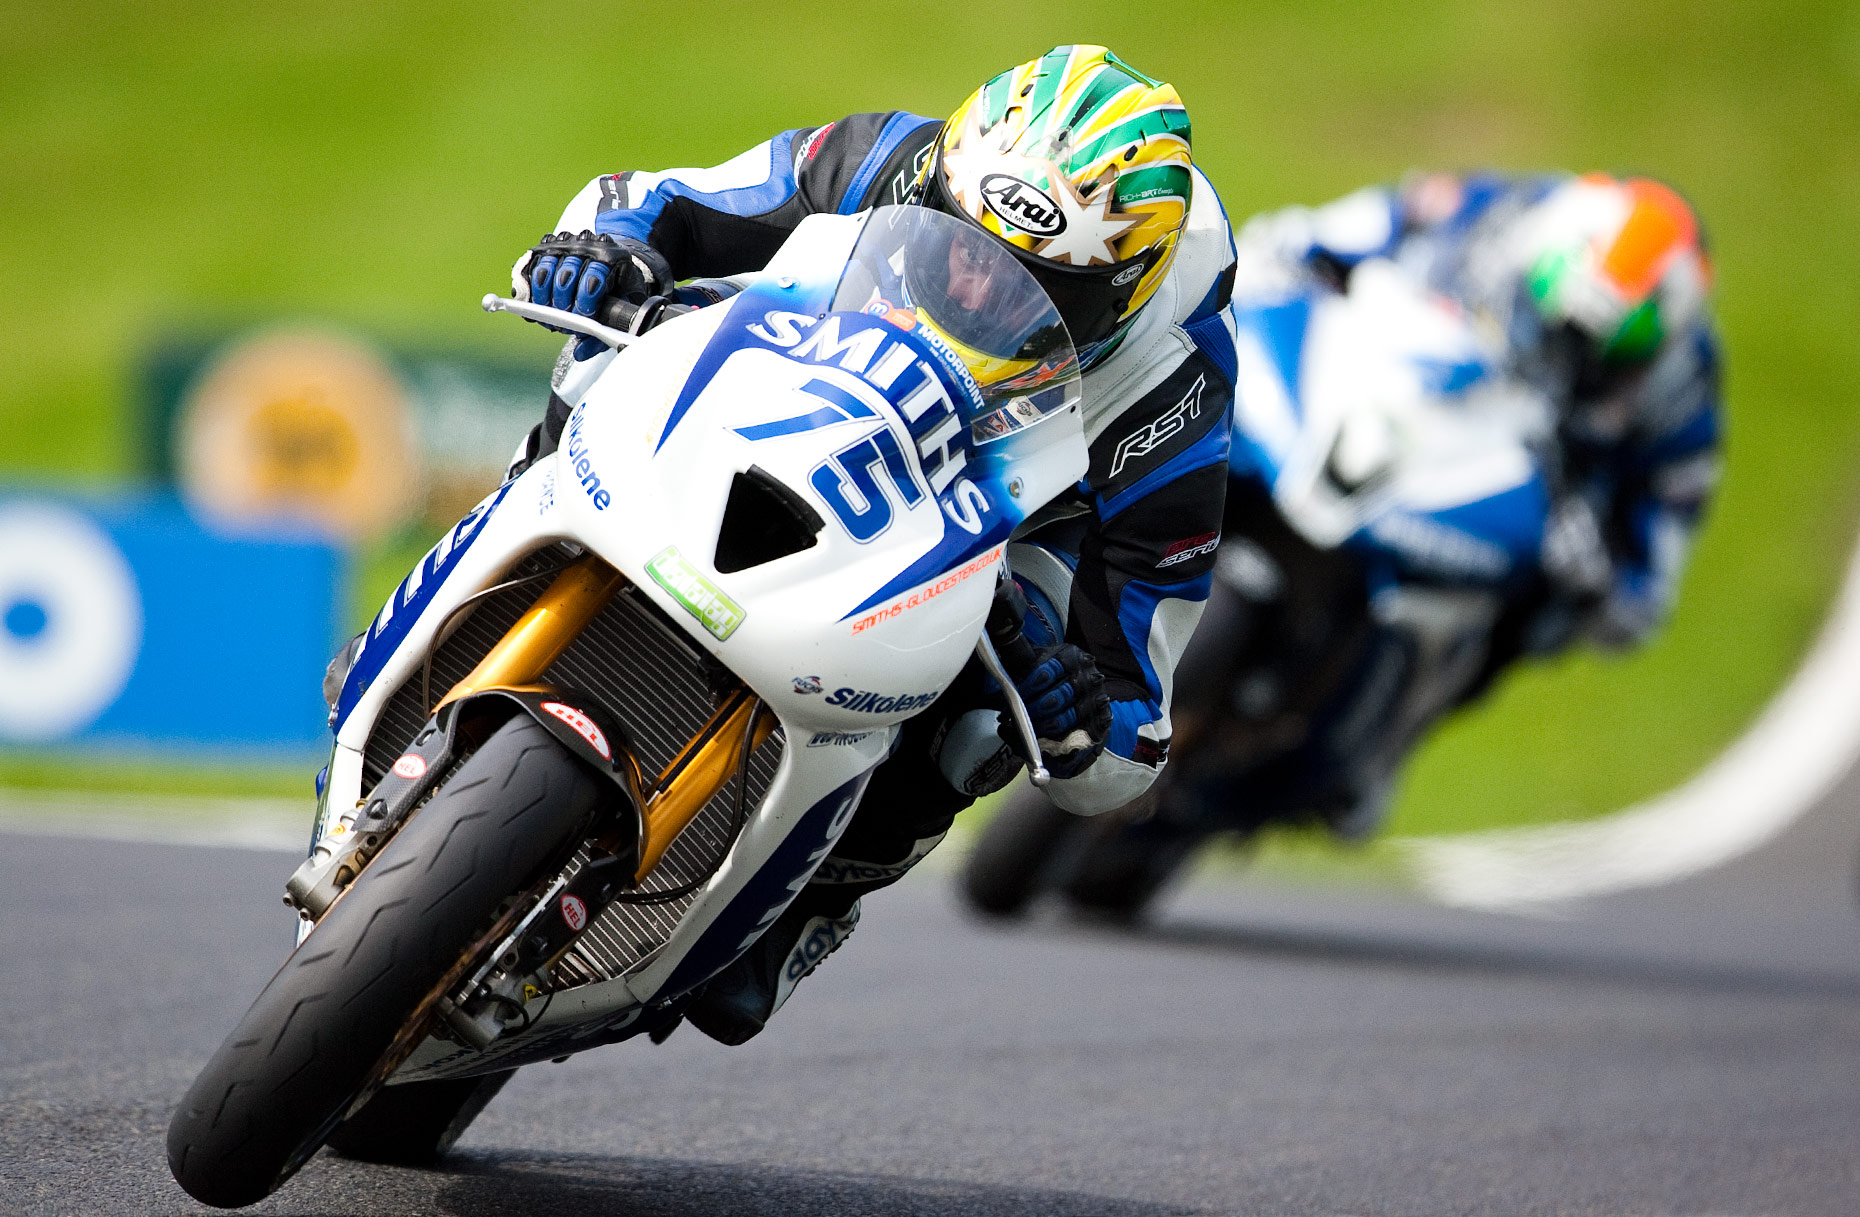 Sport Features Photography of the Smiths Racing team at the BSB British Supersport Championship.